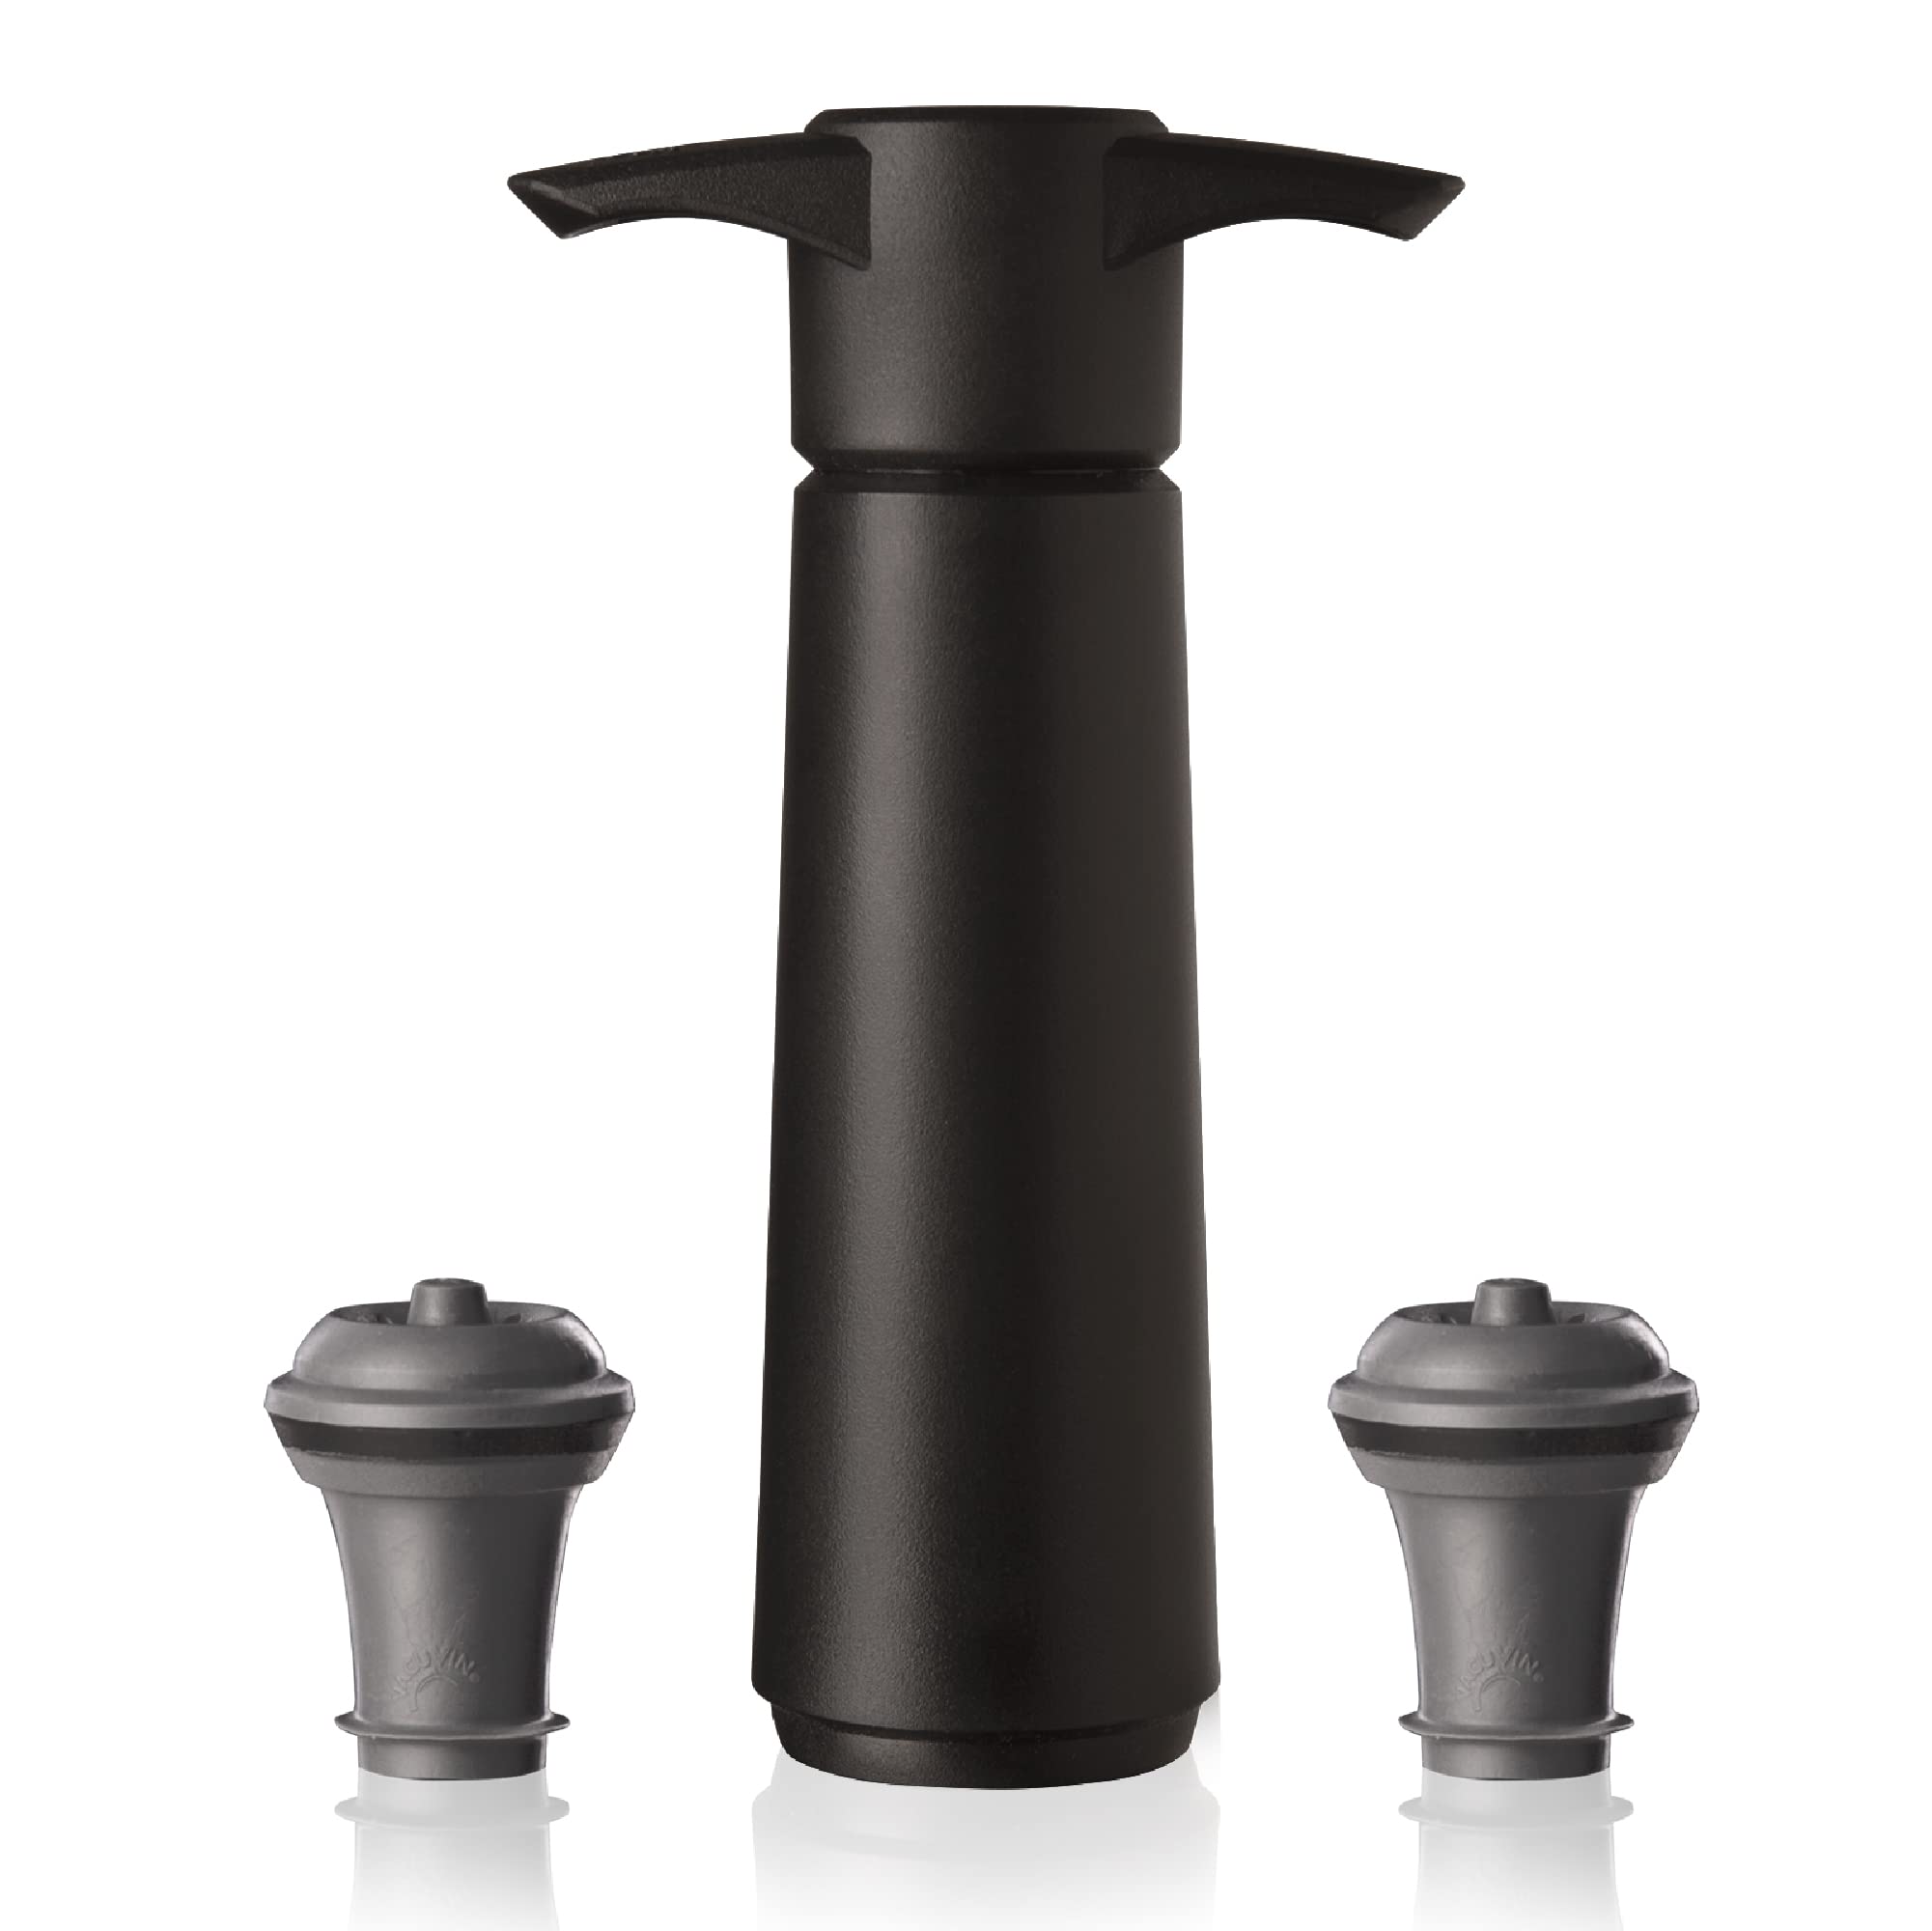 Vacu Vin Wine Saver Pump Black with Vacuum Wine Stopper - Keep Your Wine Fresh for up to 10 Days - 1 Pump 2 Stoppers - Reusable - Made in the Netherlands